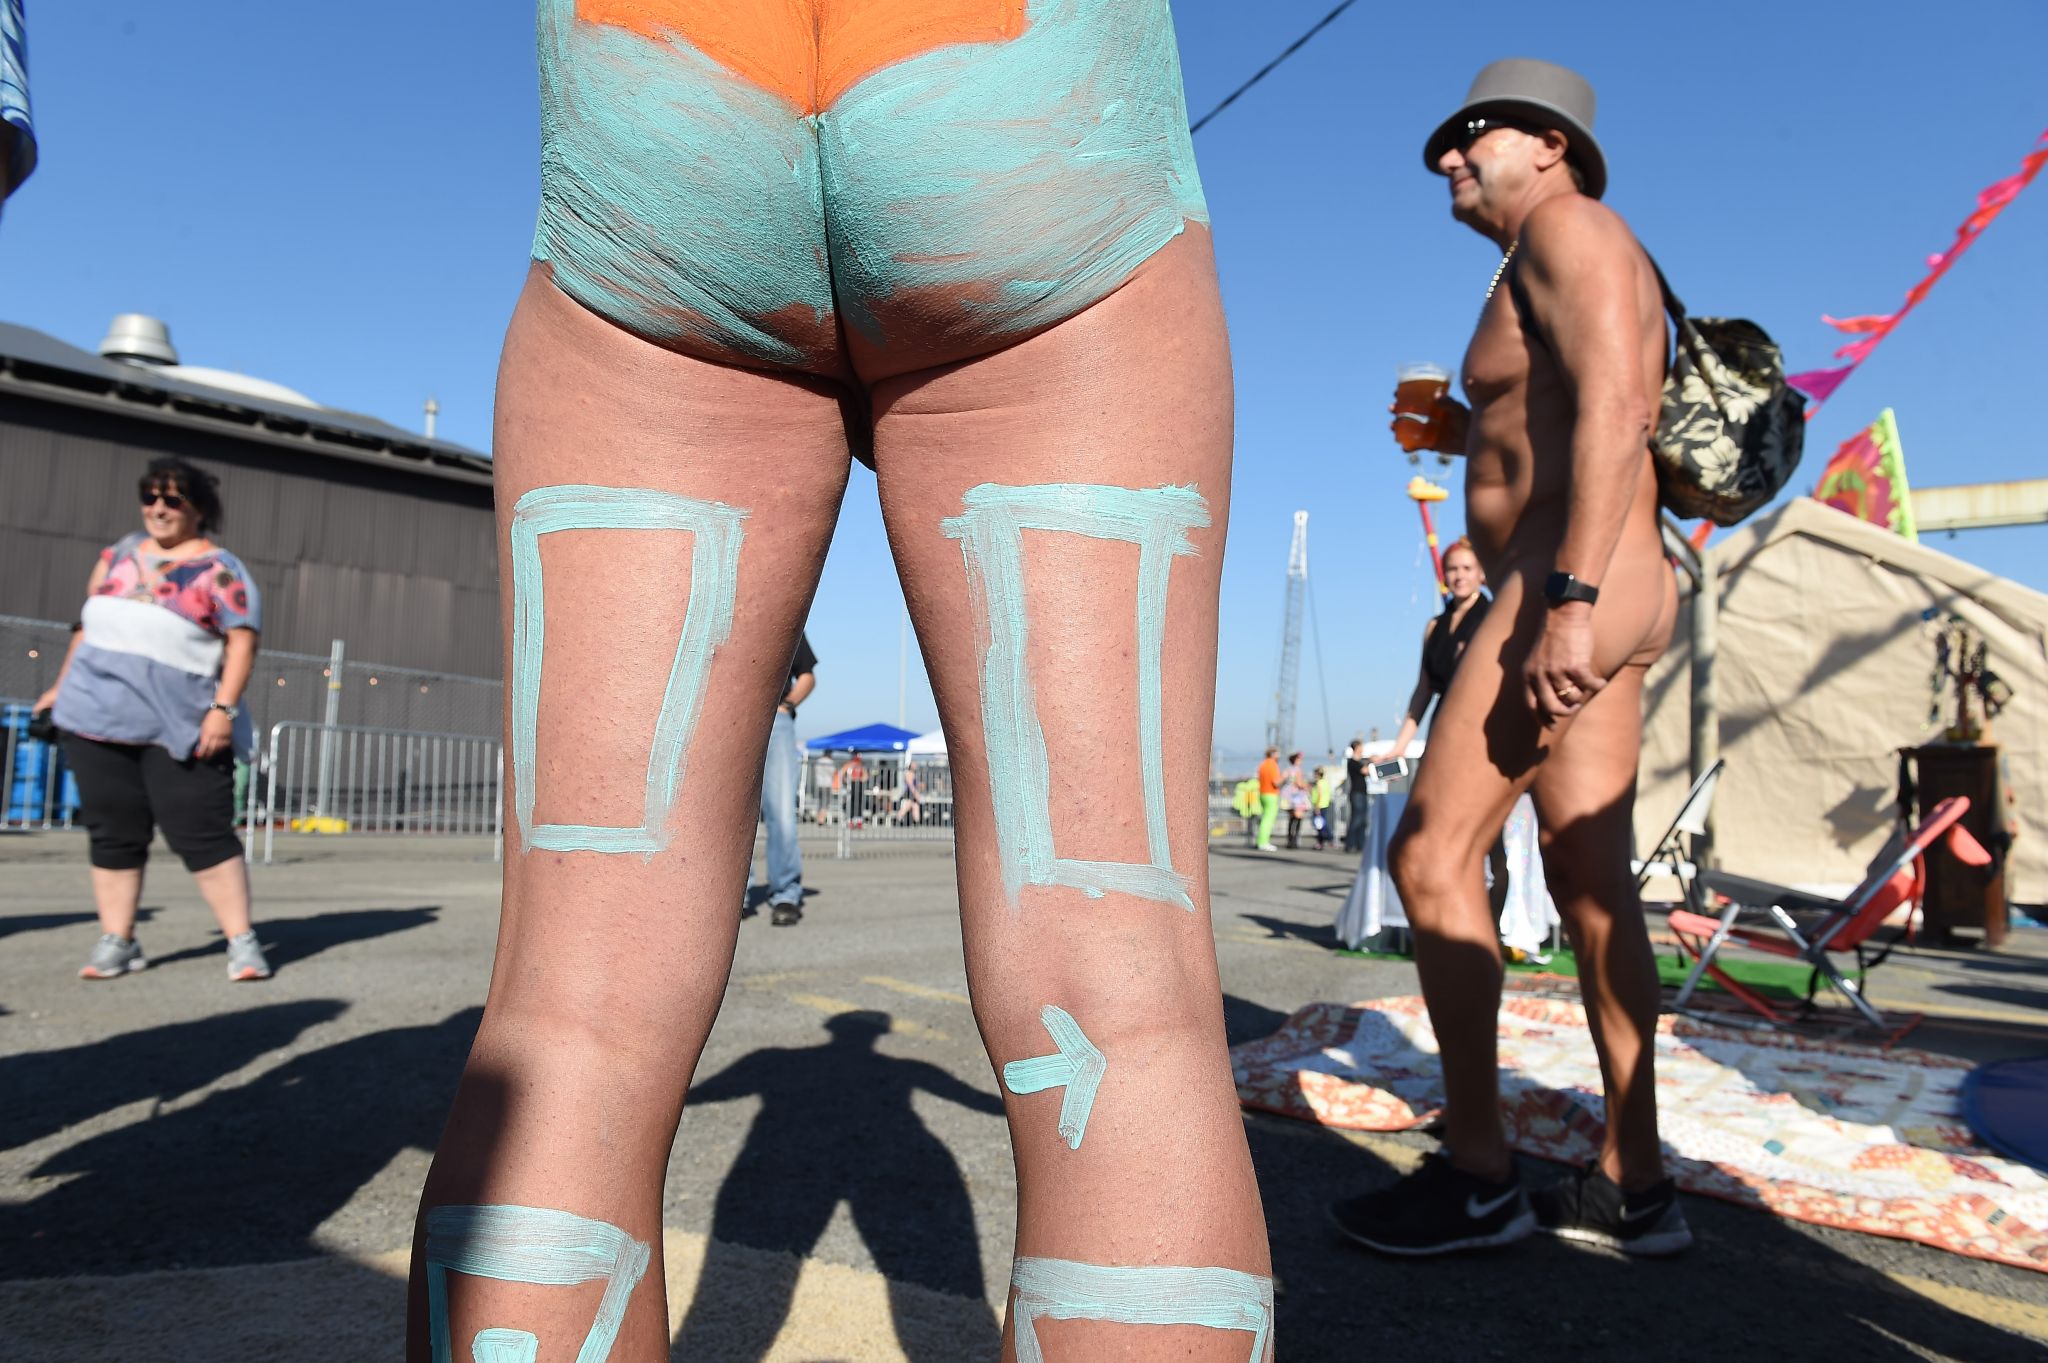 Beach Body Paint Naked - Nude body painting takes over San Francisco's 'urban Burning Man'